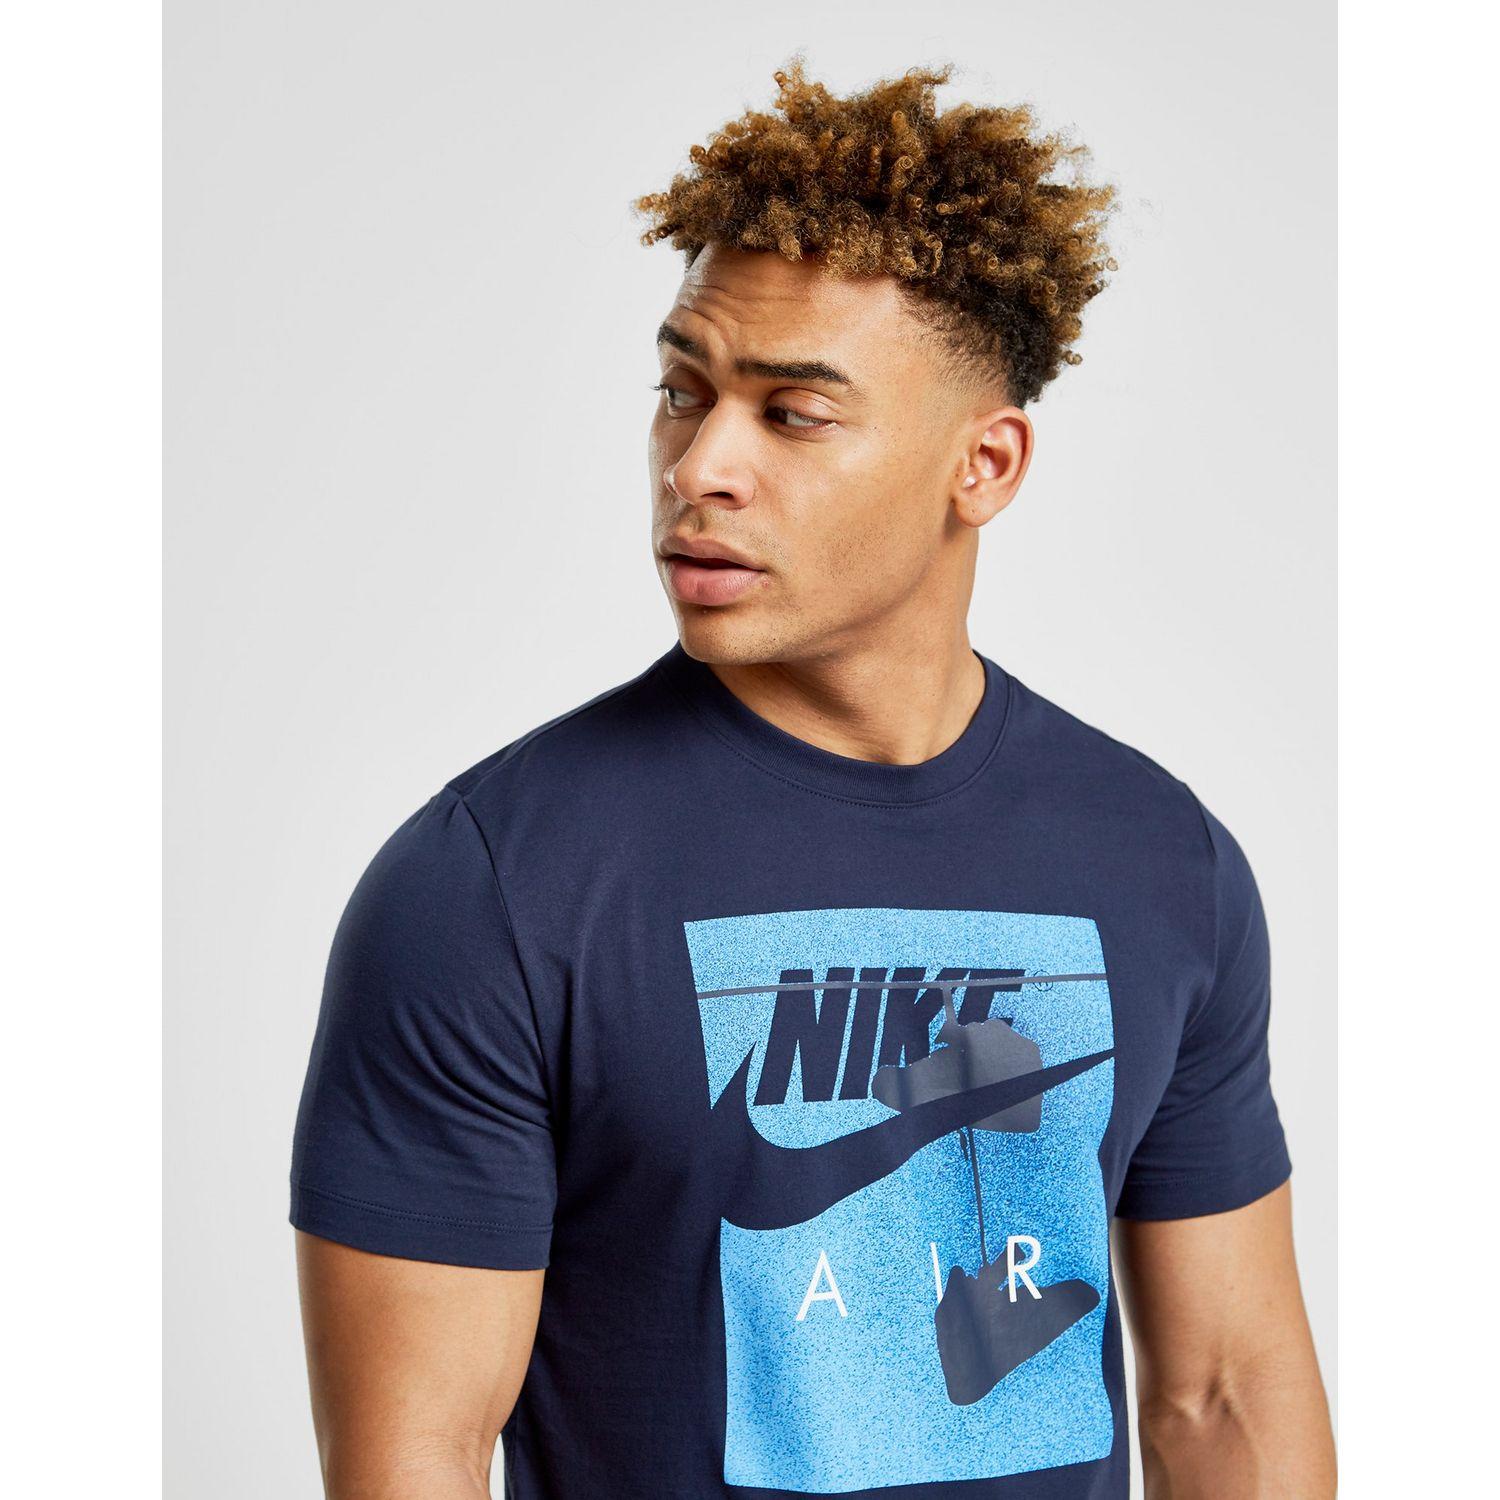 Nike Cotton Air Shoes T-shirt in Navy (Blue) for Men - Lyst